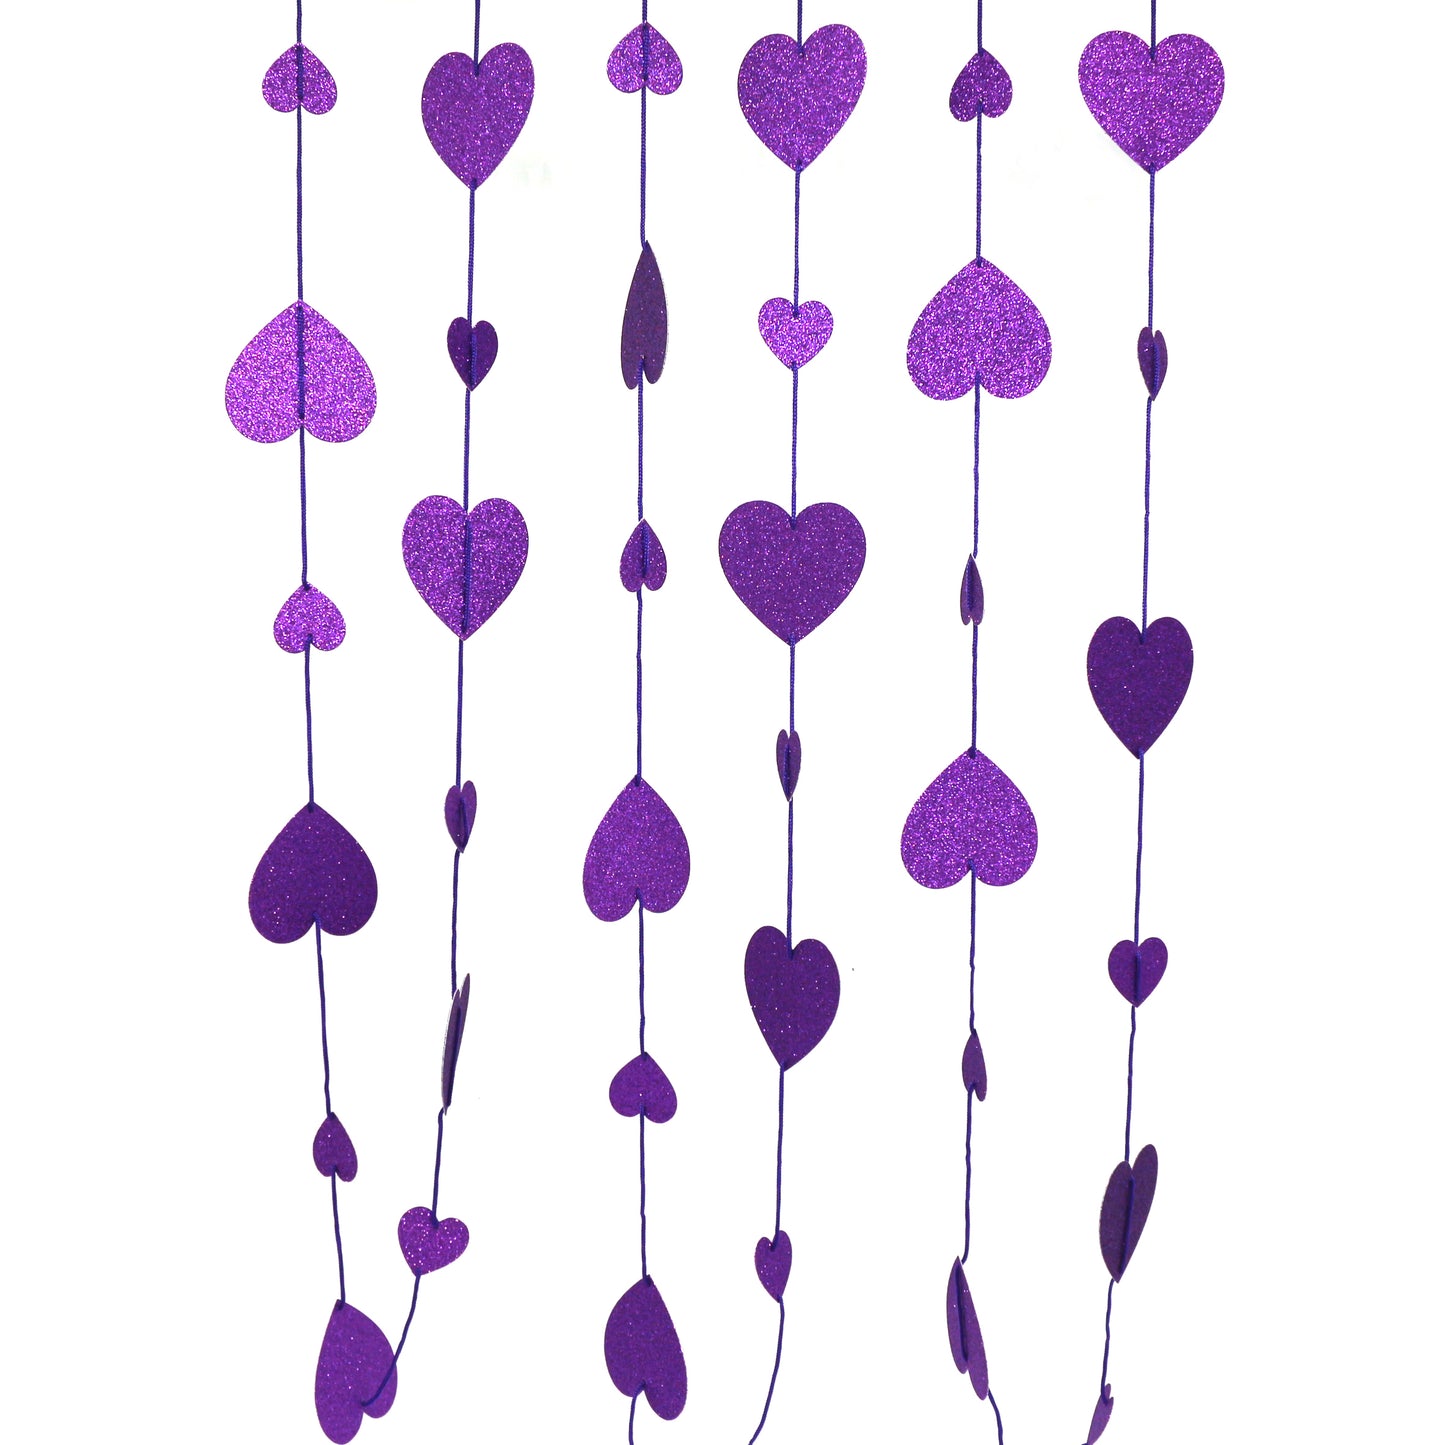 CVHOMEDECO. Twinkle Glittered Paper Heart Shape String Garland Unique Hanging Bunting Banner for Wedding Birthday Party Festival Home Background Decoration, 5.5 feet, Pack of 2 PCS (Purple)